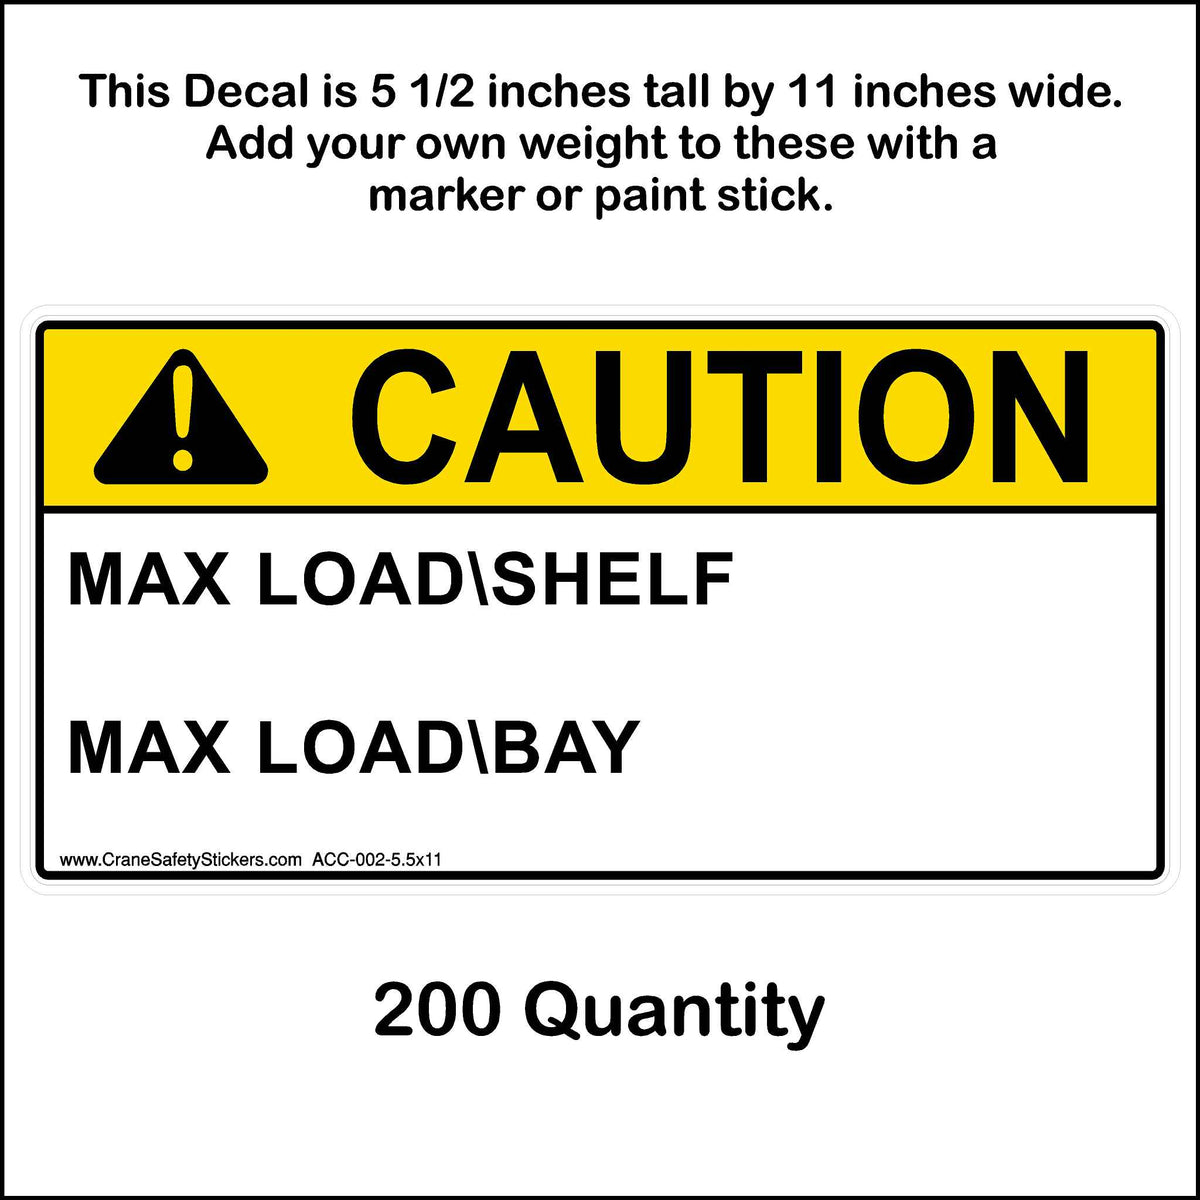 5 1/2 by 11 inch Max load shelf and max load bay sticker 200 quantity